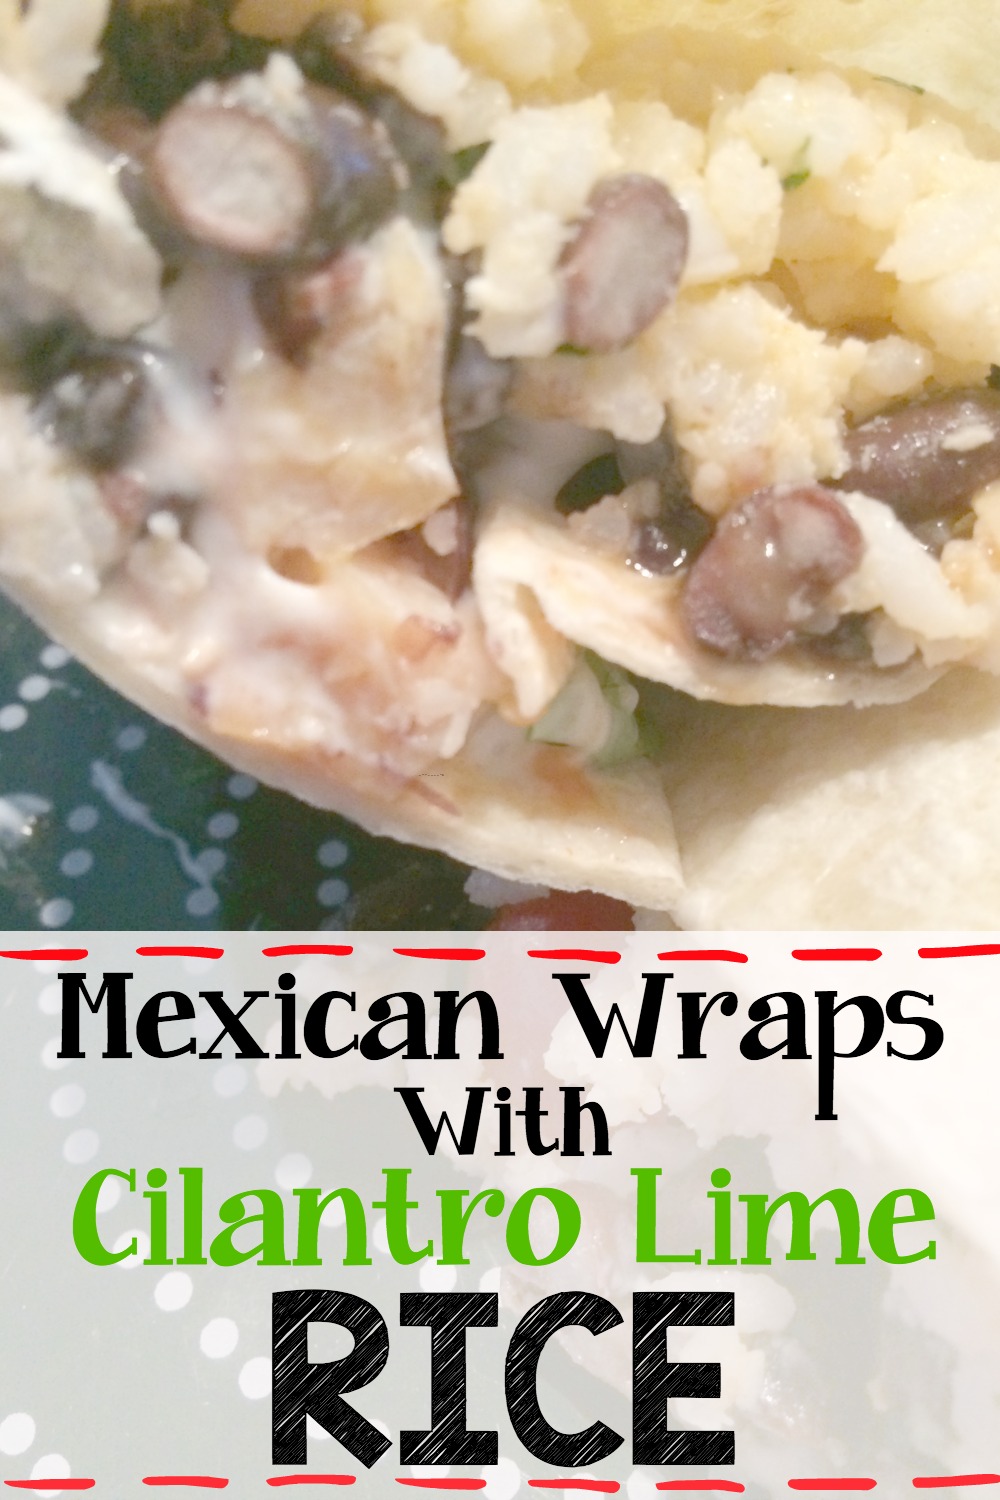 Recipe: Mexican Wraps with Cilantro Lime Rice